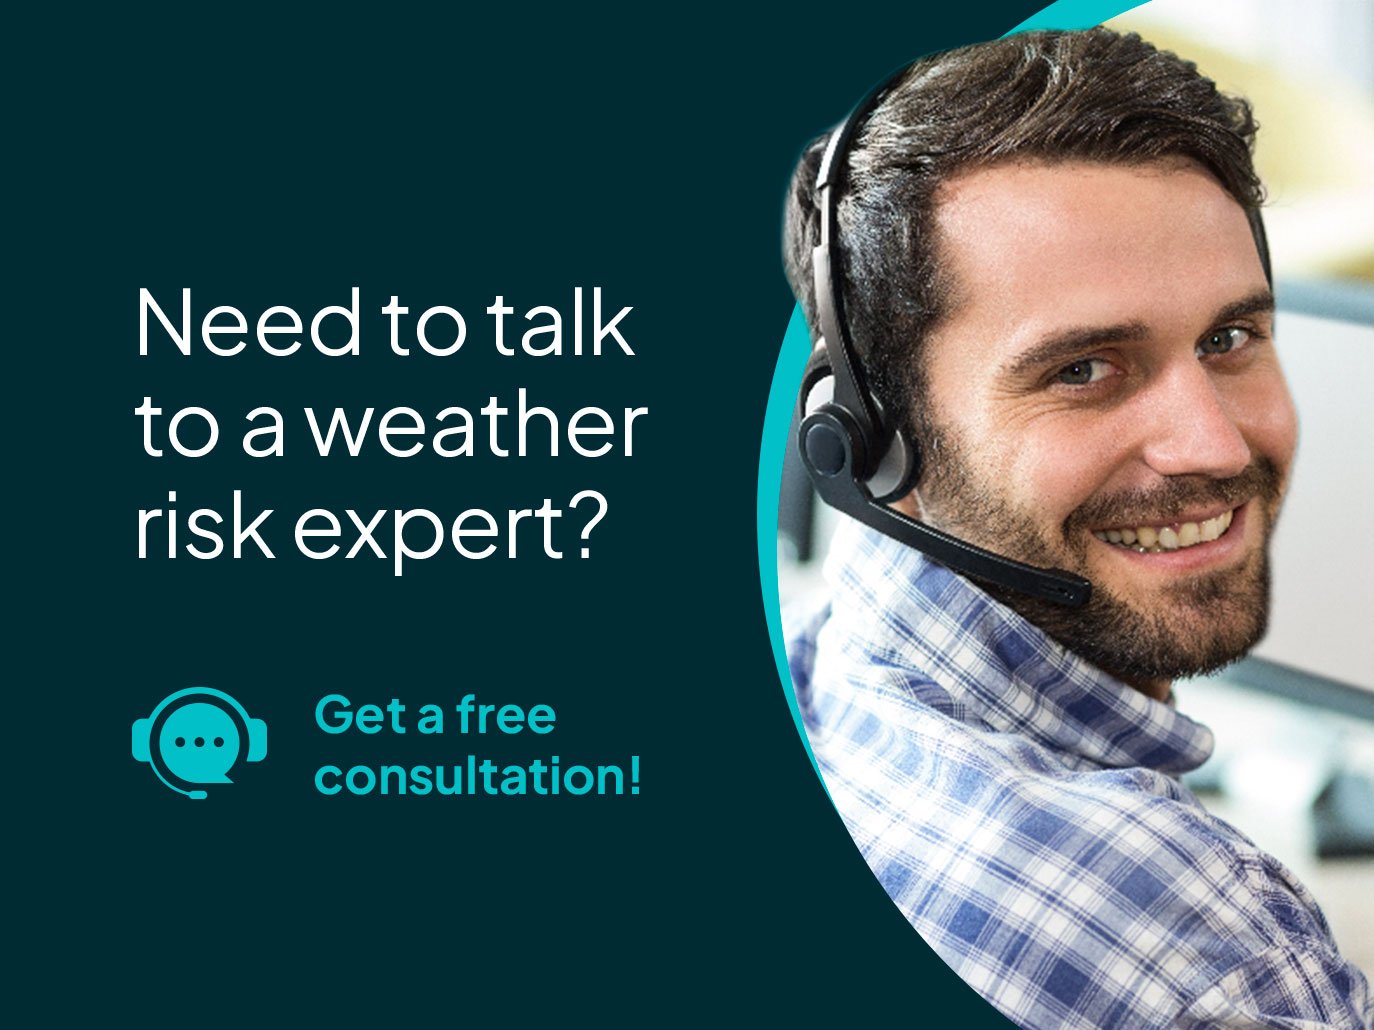 Contact AEM today to talk to a weather risk expert